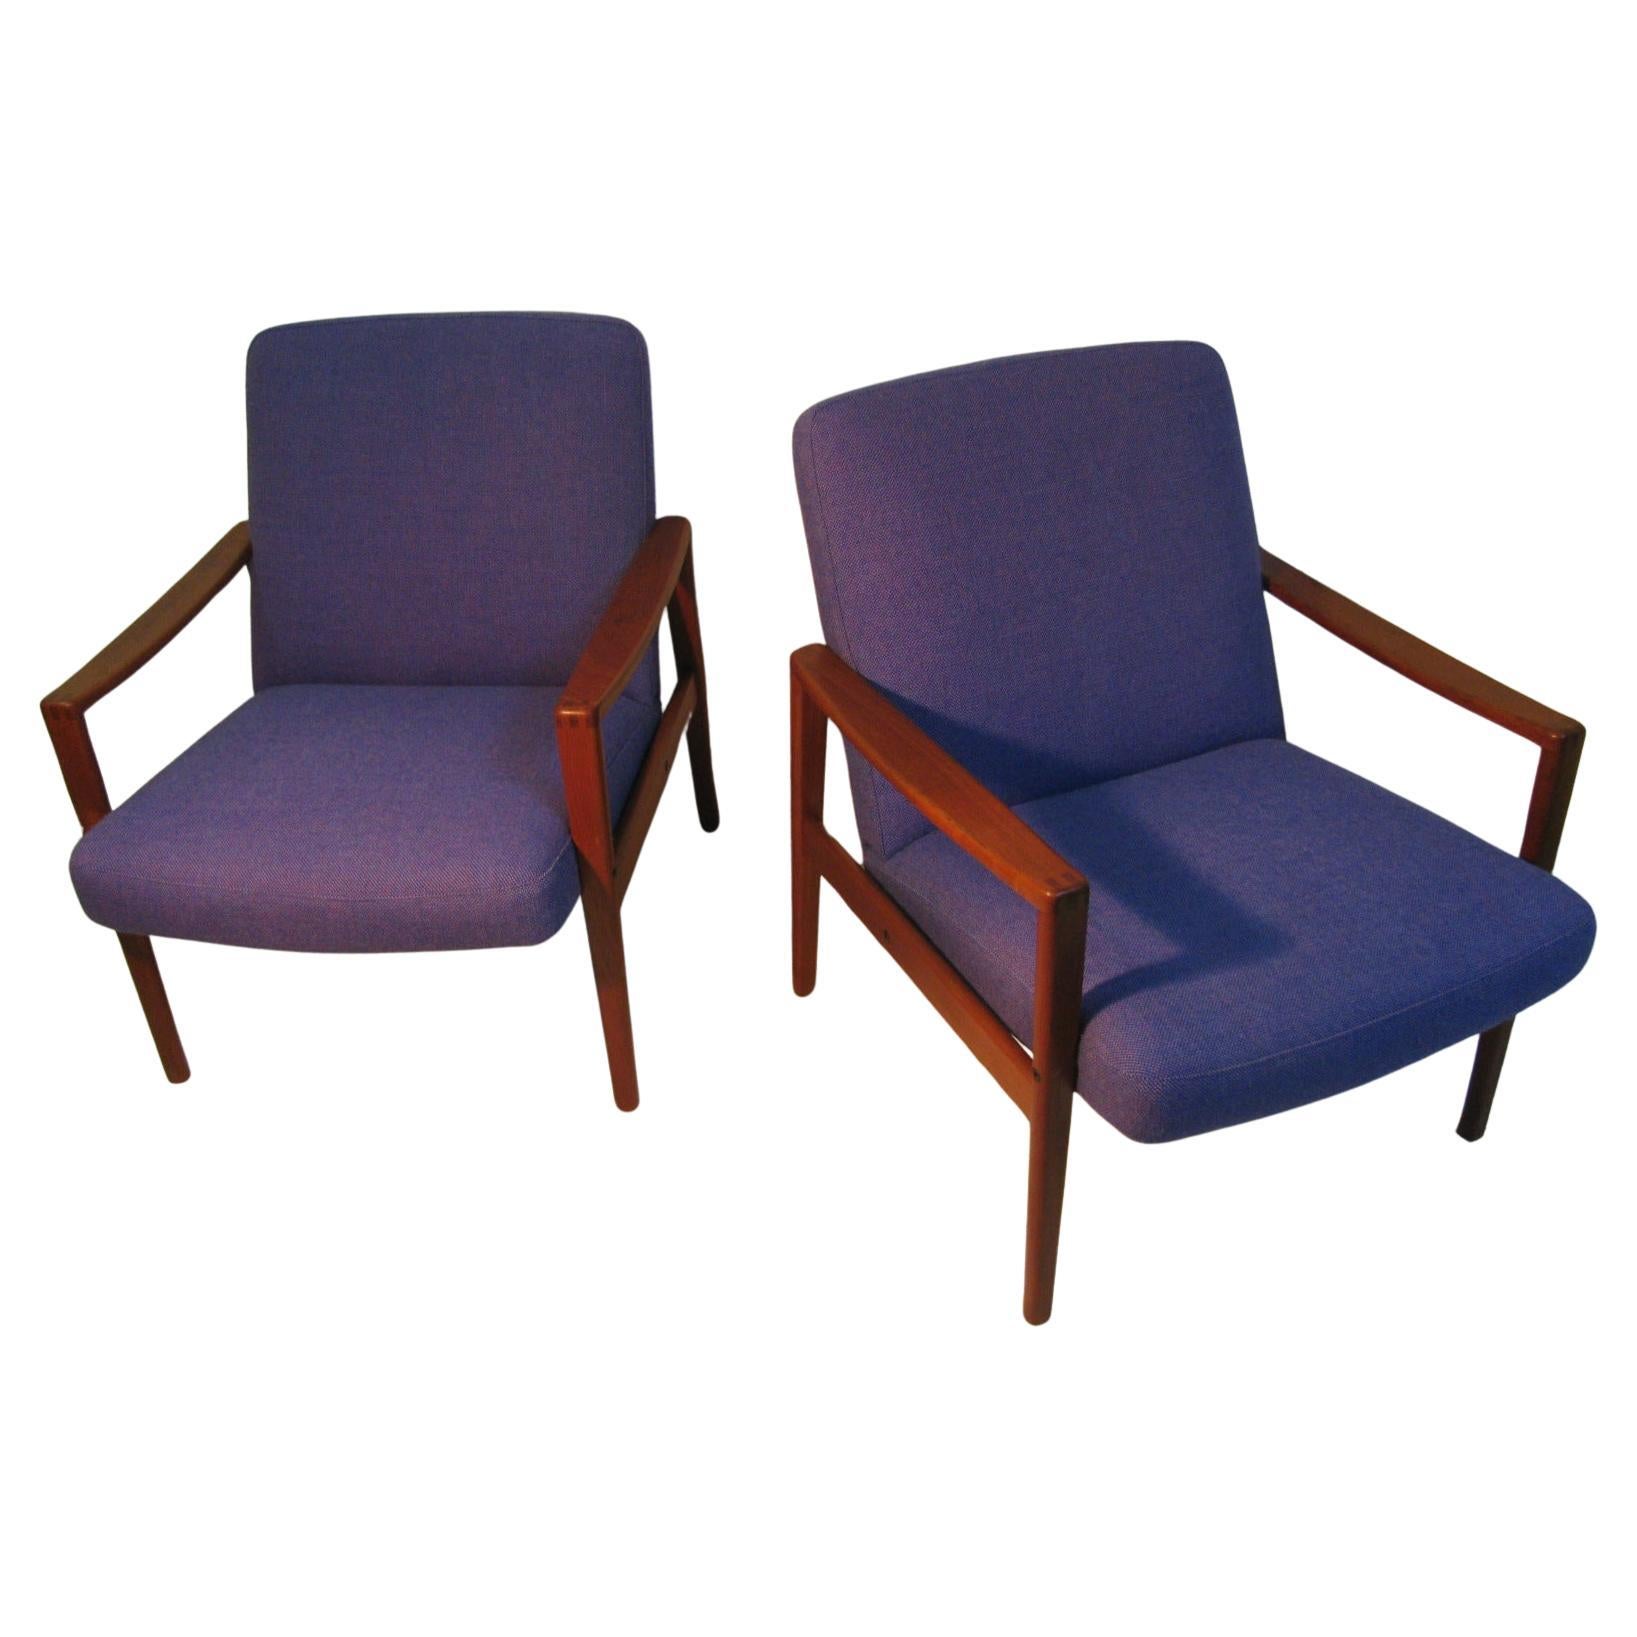 Pair of Mid Century Scandinavian Modern Lounge Chairs Ulferts Sweden In Good Condition For Sale In Port Jervis, NY